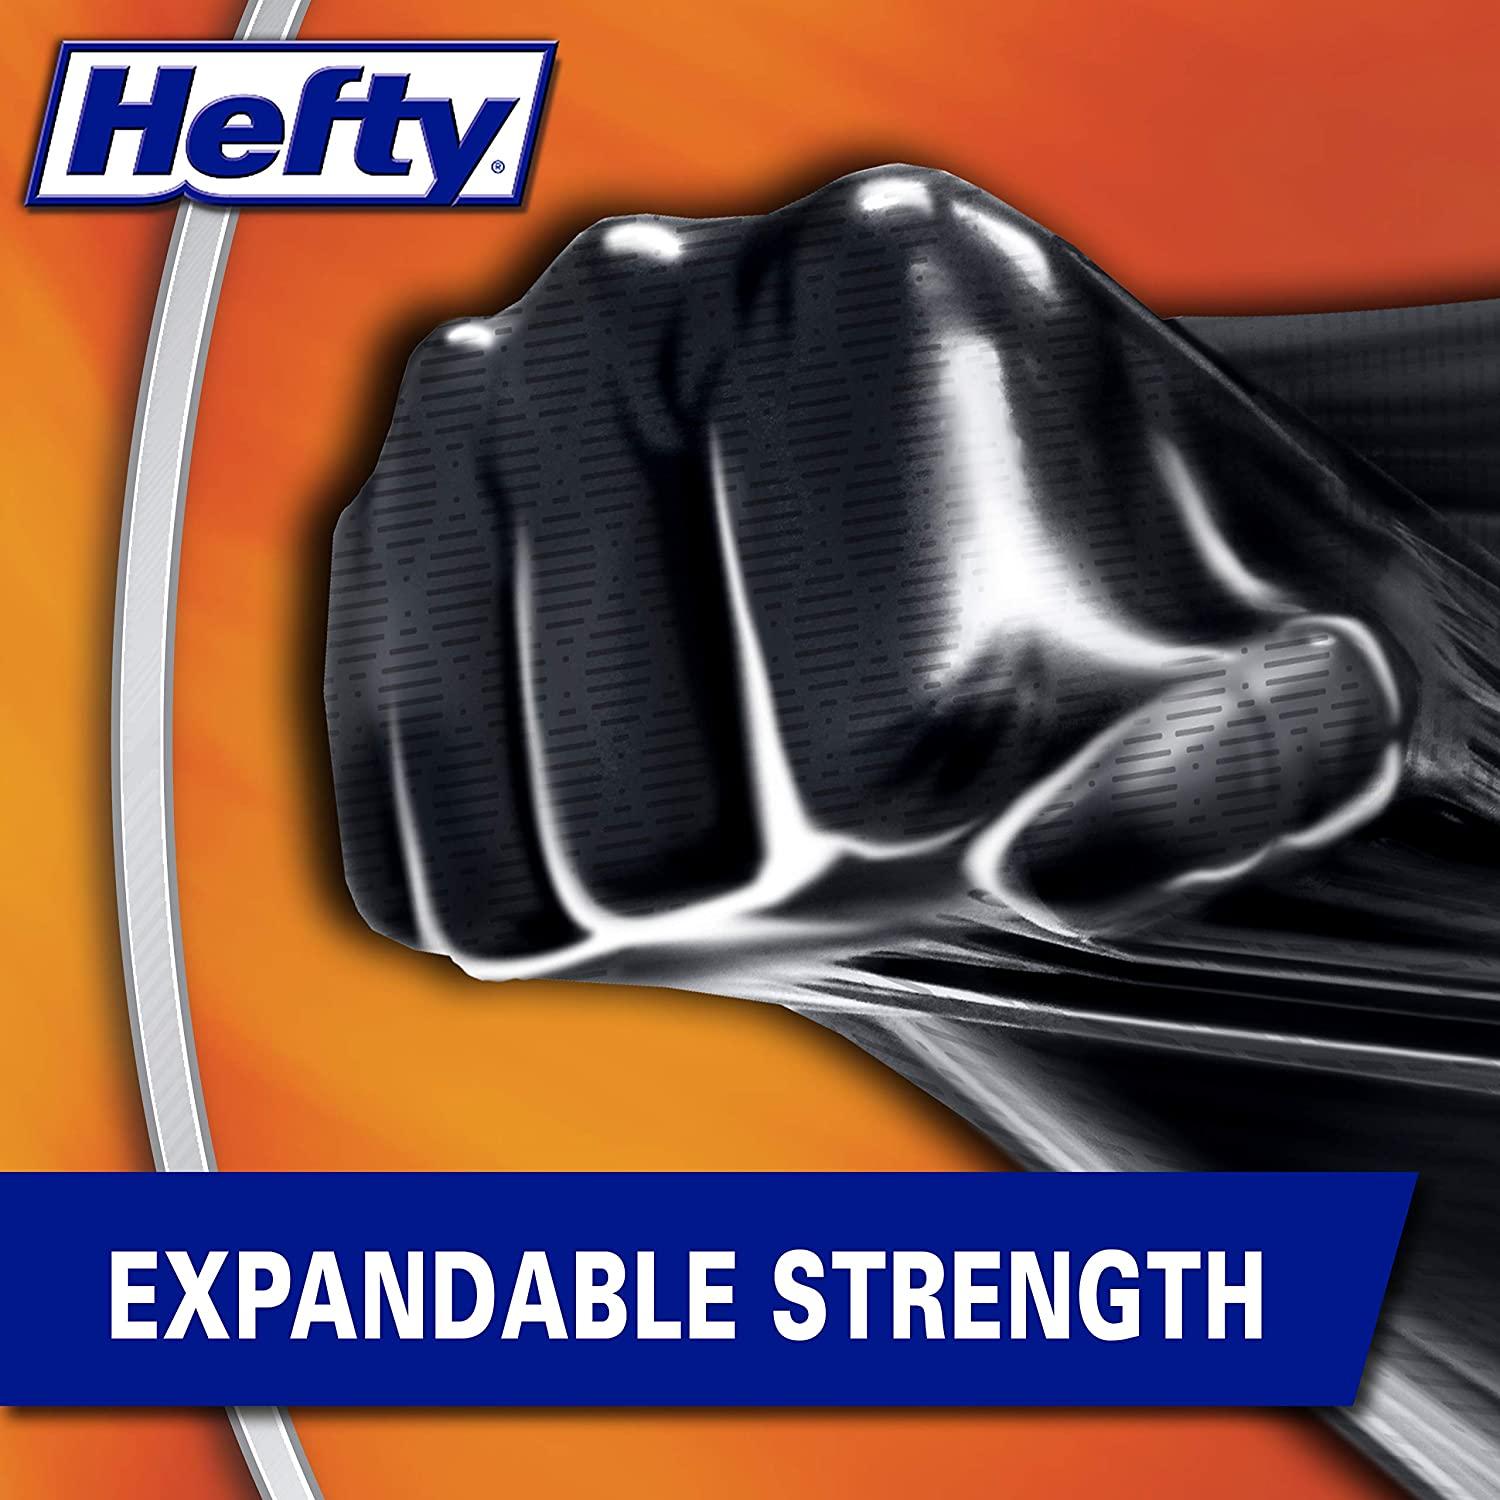 Hefty® Ultra Strong™ Multipurpose White Pine Breeze 30 Gallon Drawstring Trash  Bags, 25 ct - Fry's Food Stores